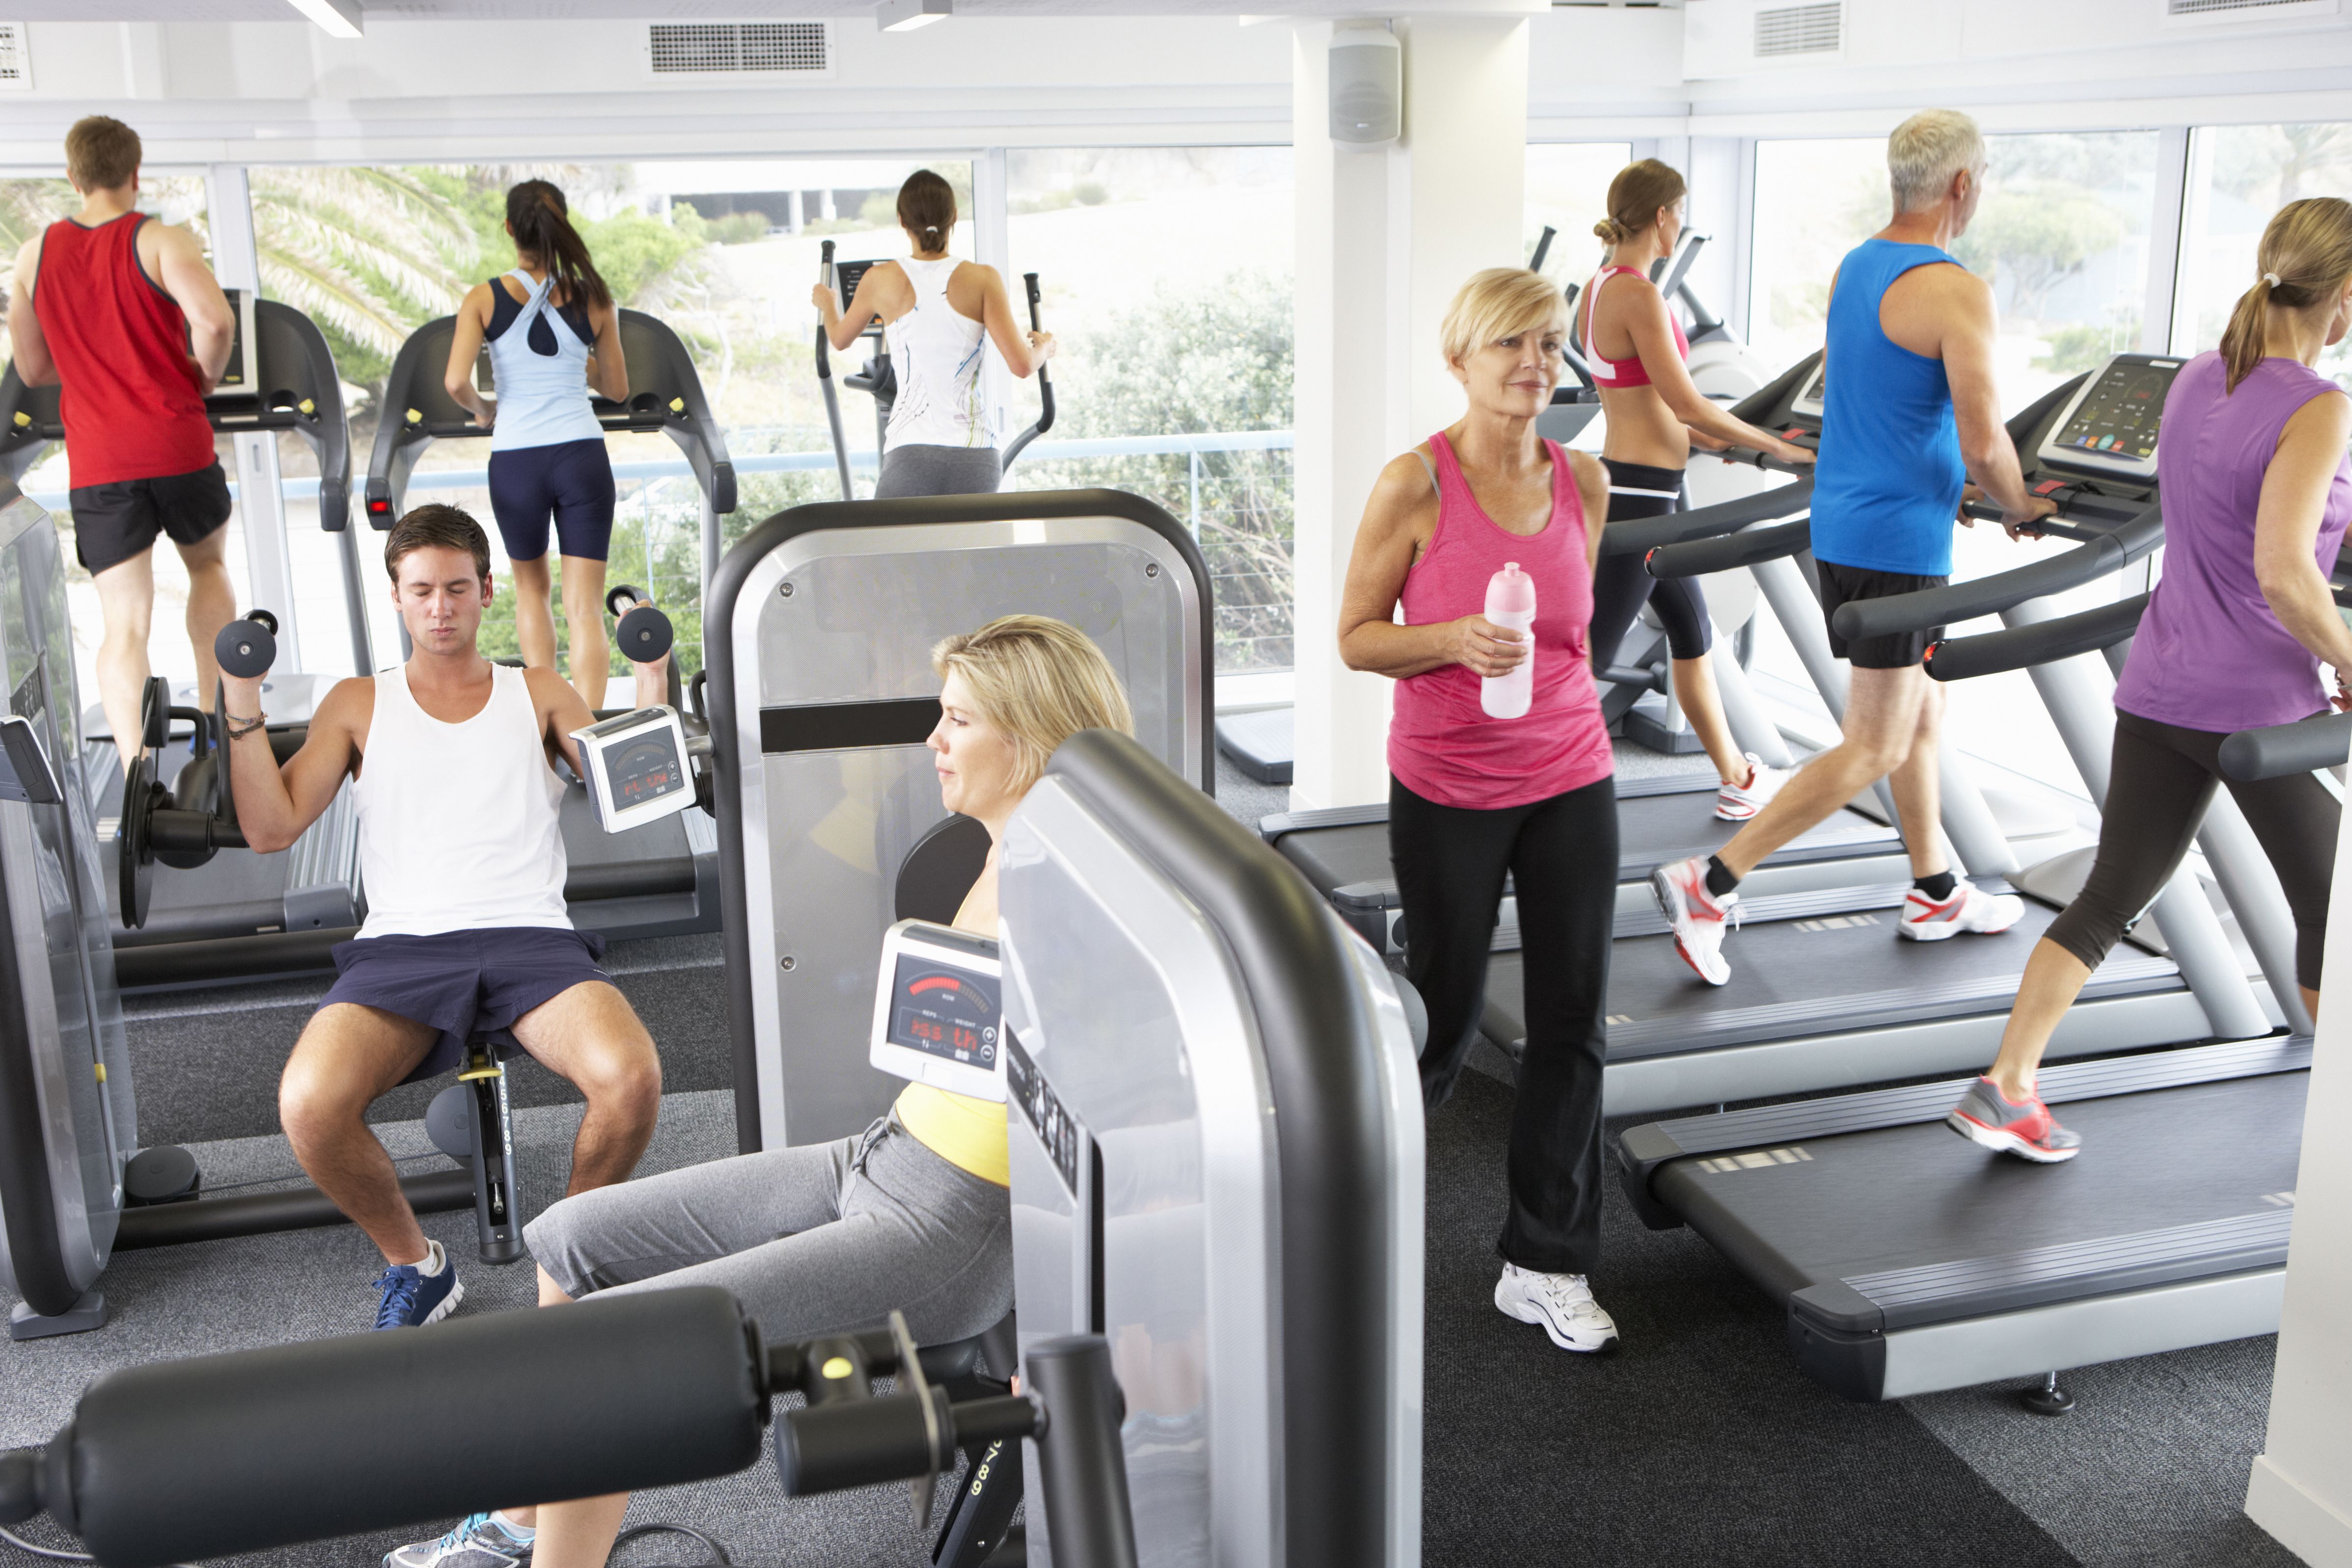 Regular, daily exercise may help boost immunity while social